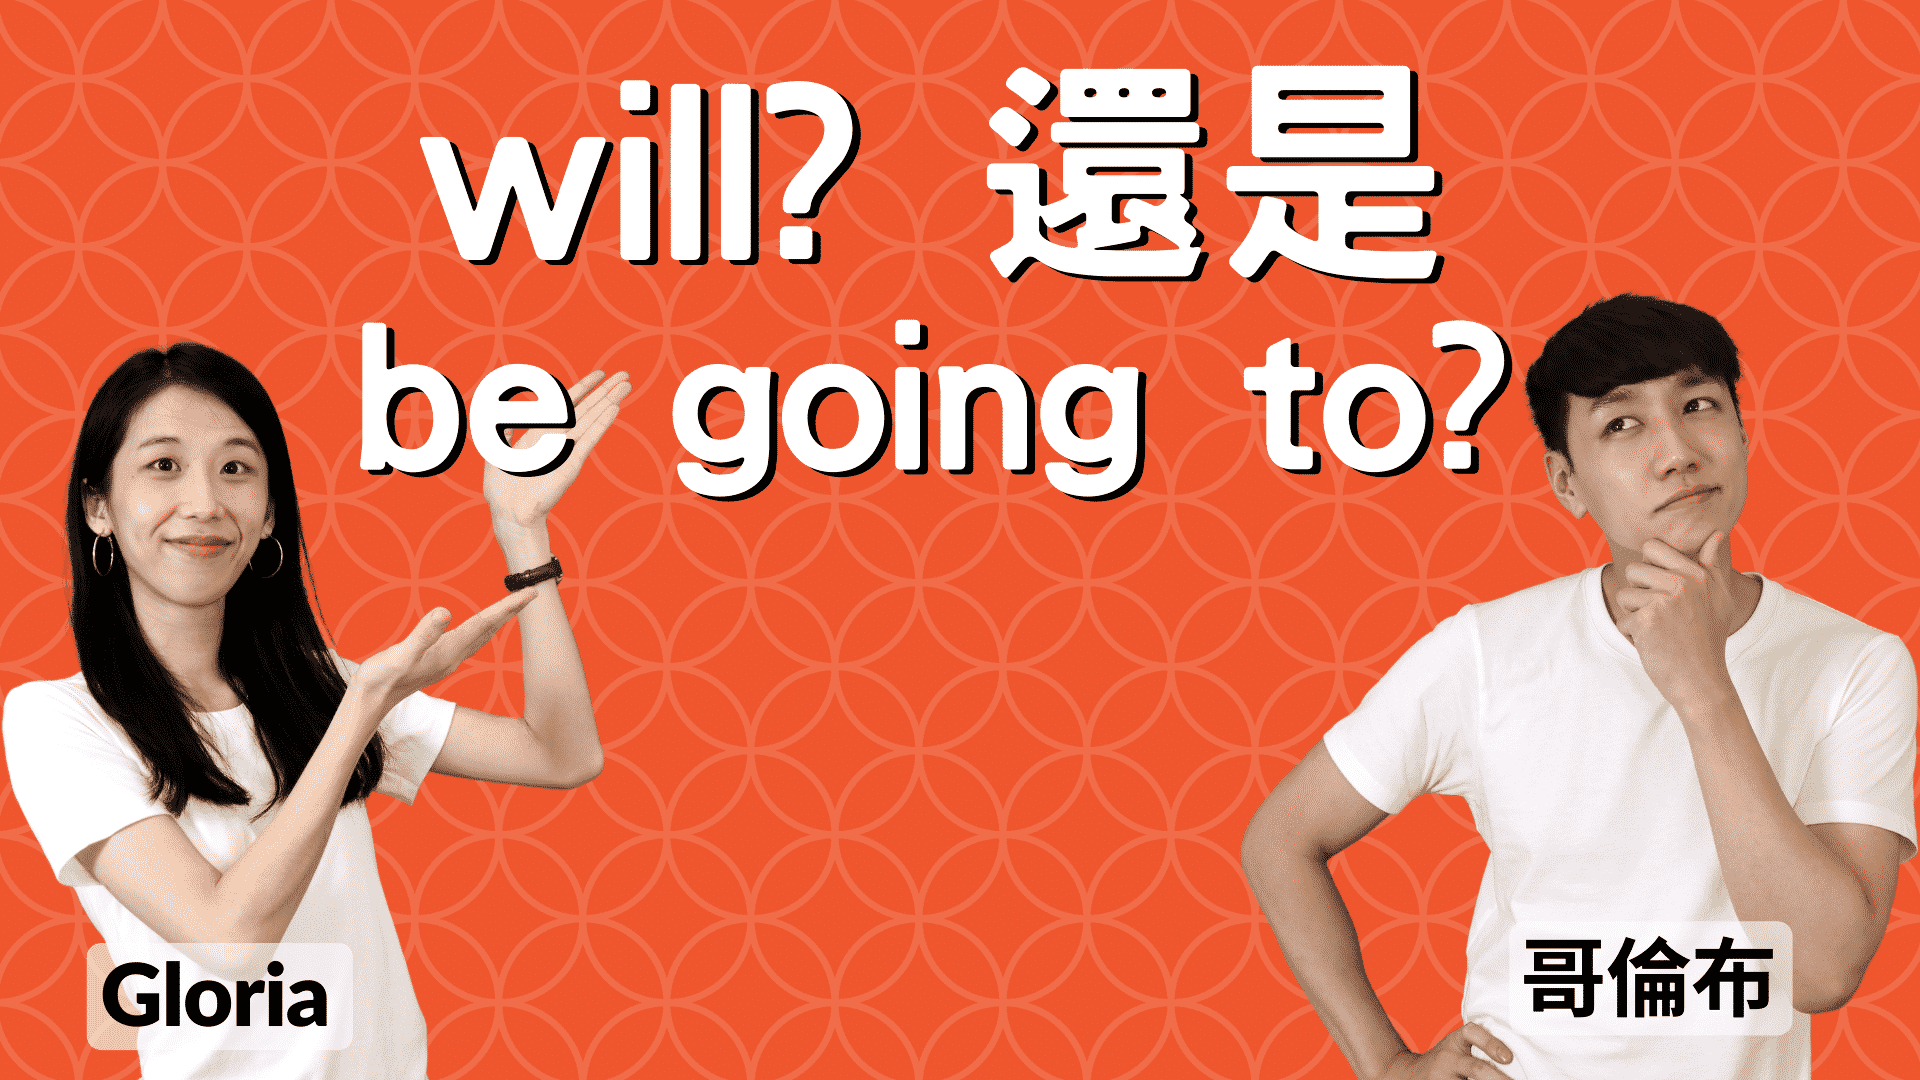 You are currently viewing 該用「Will」 還是「Be going to」? 來一次搞懂！